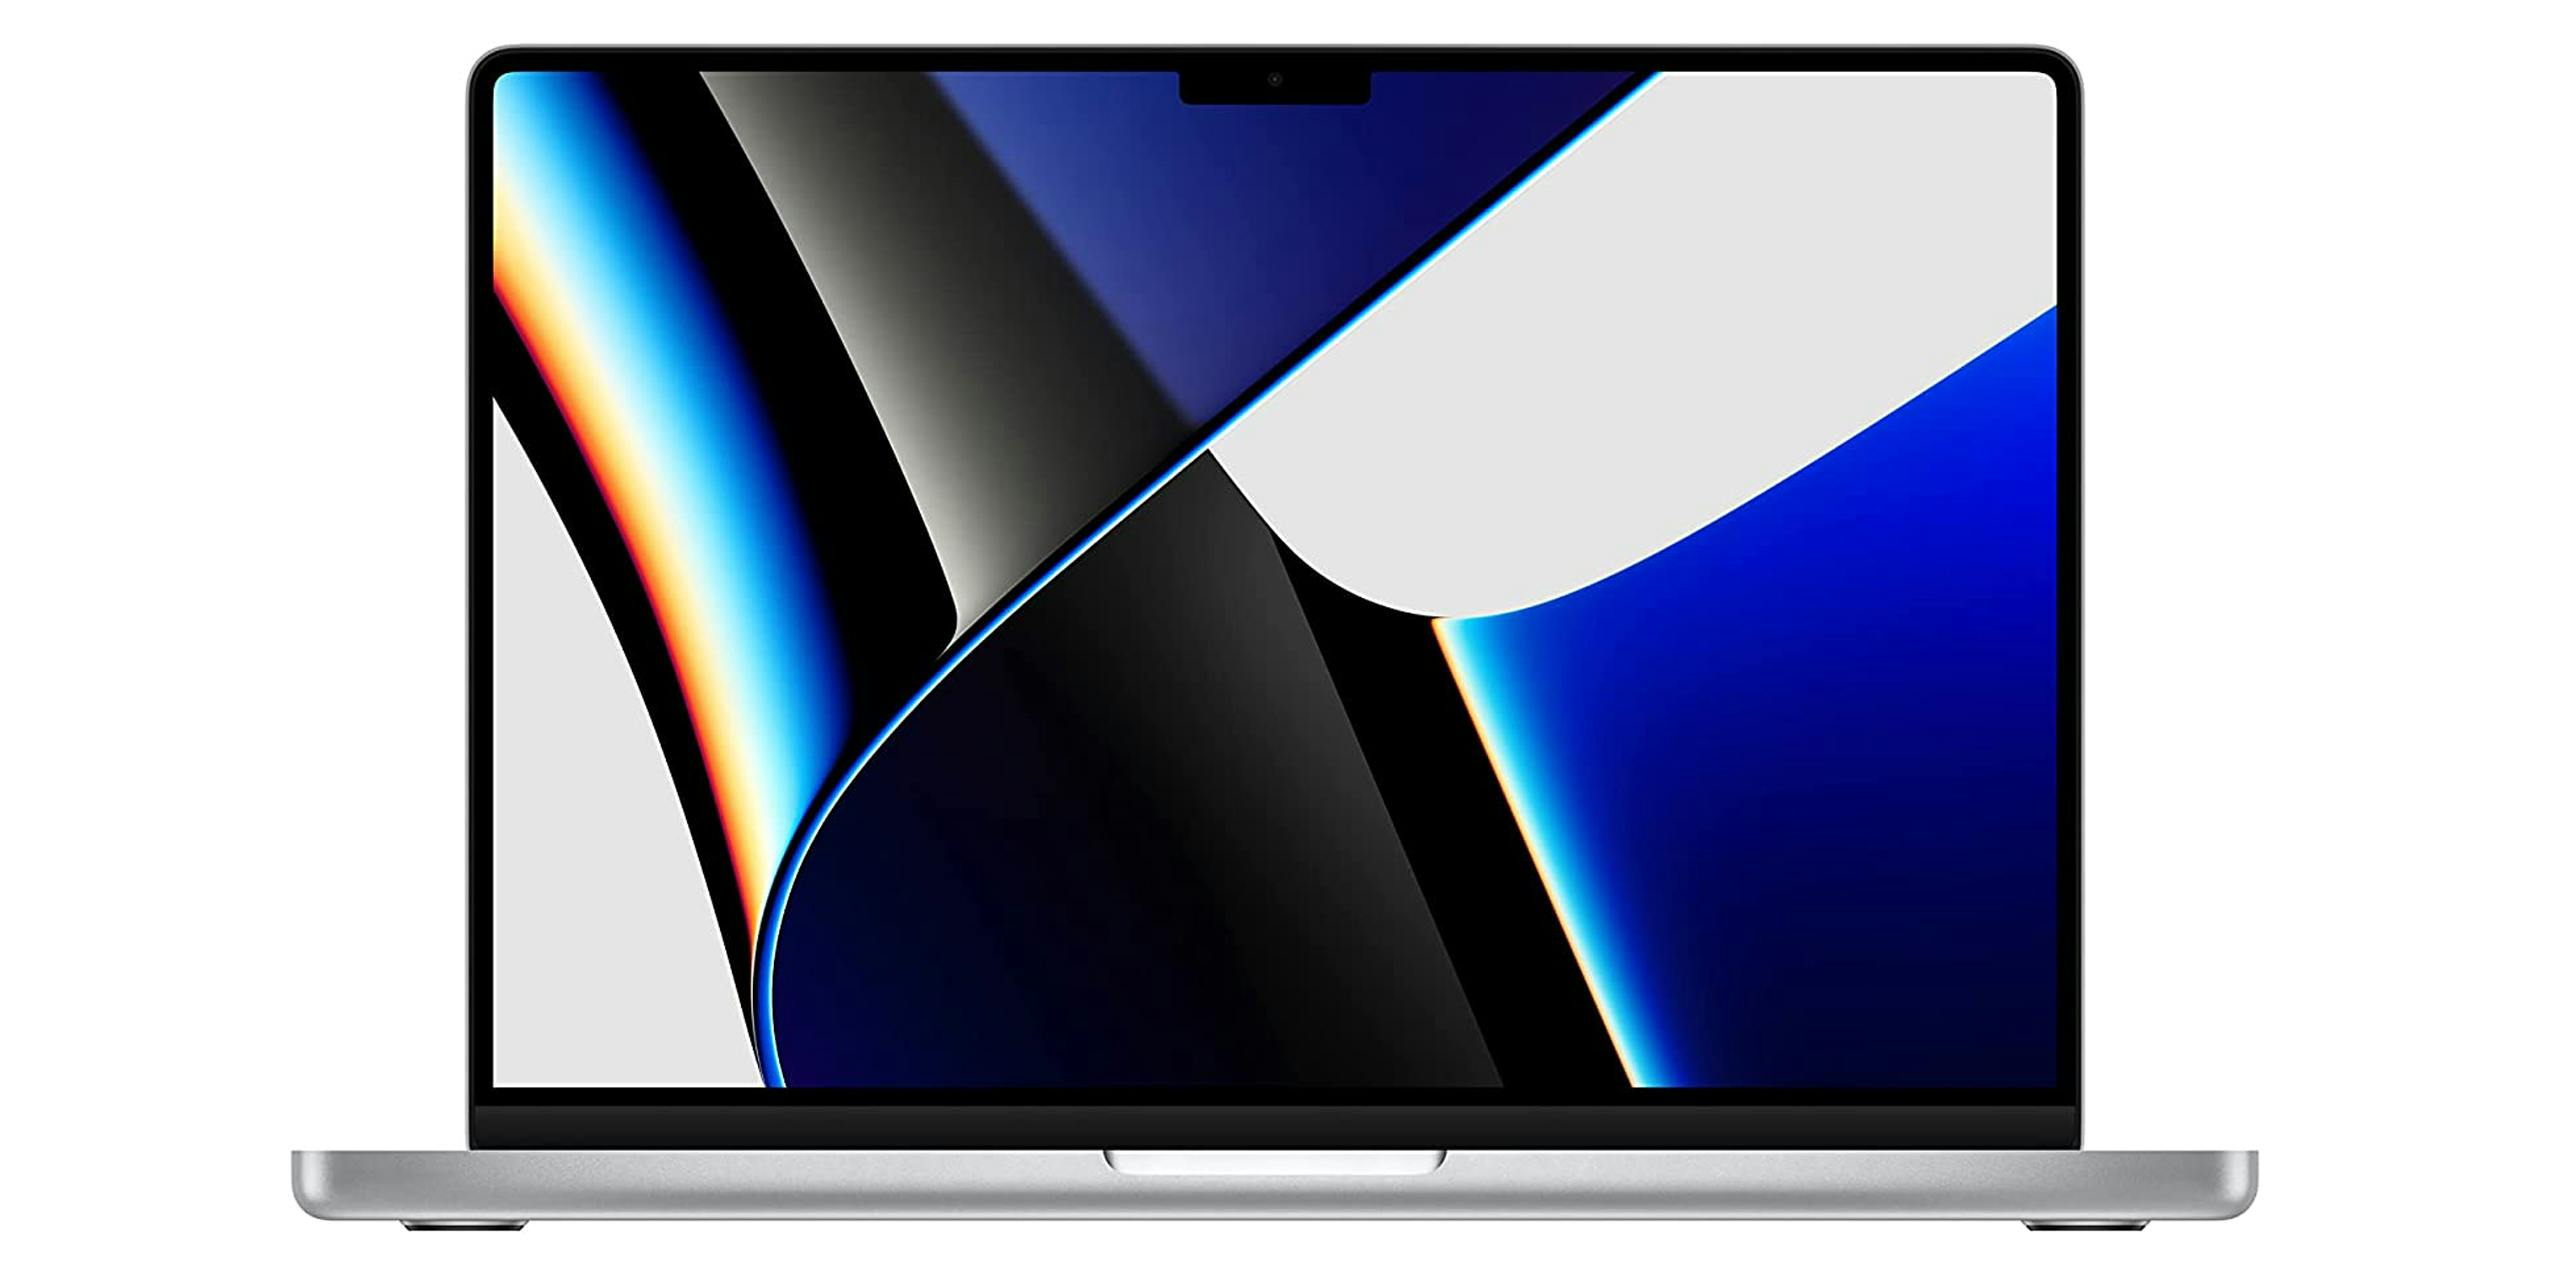 A MacBook Pro product image.